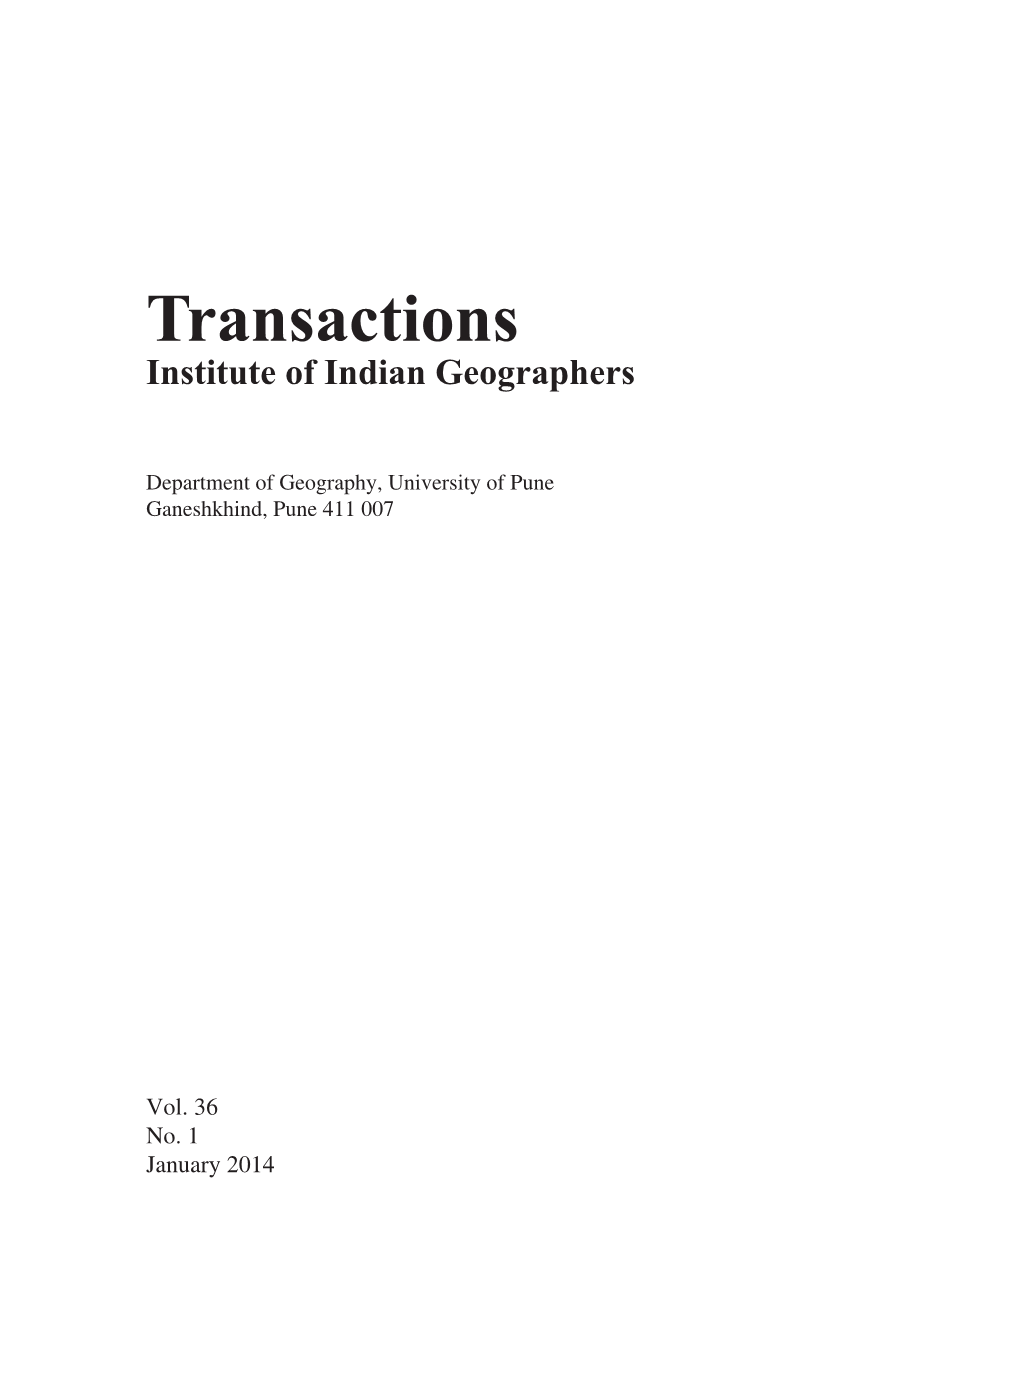 Transactions Institute of Indian Geographers